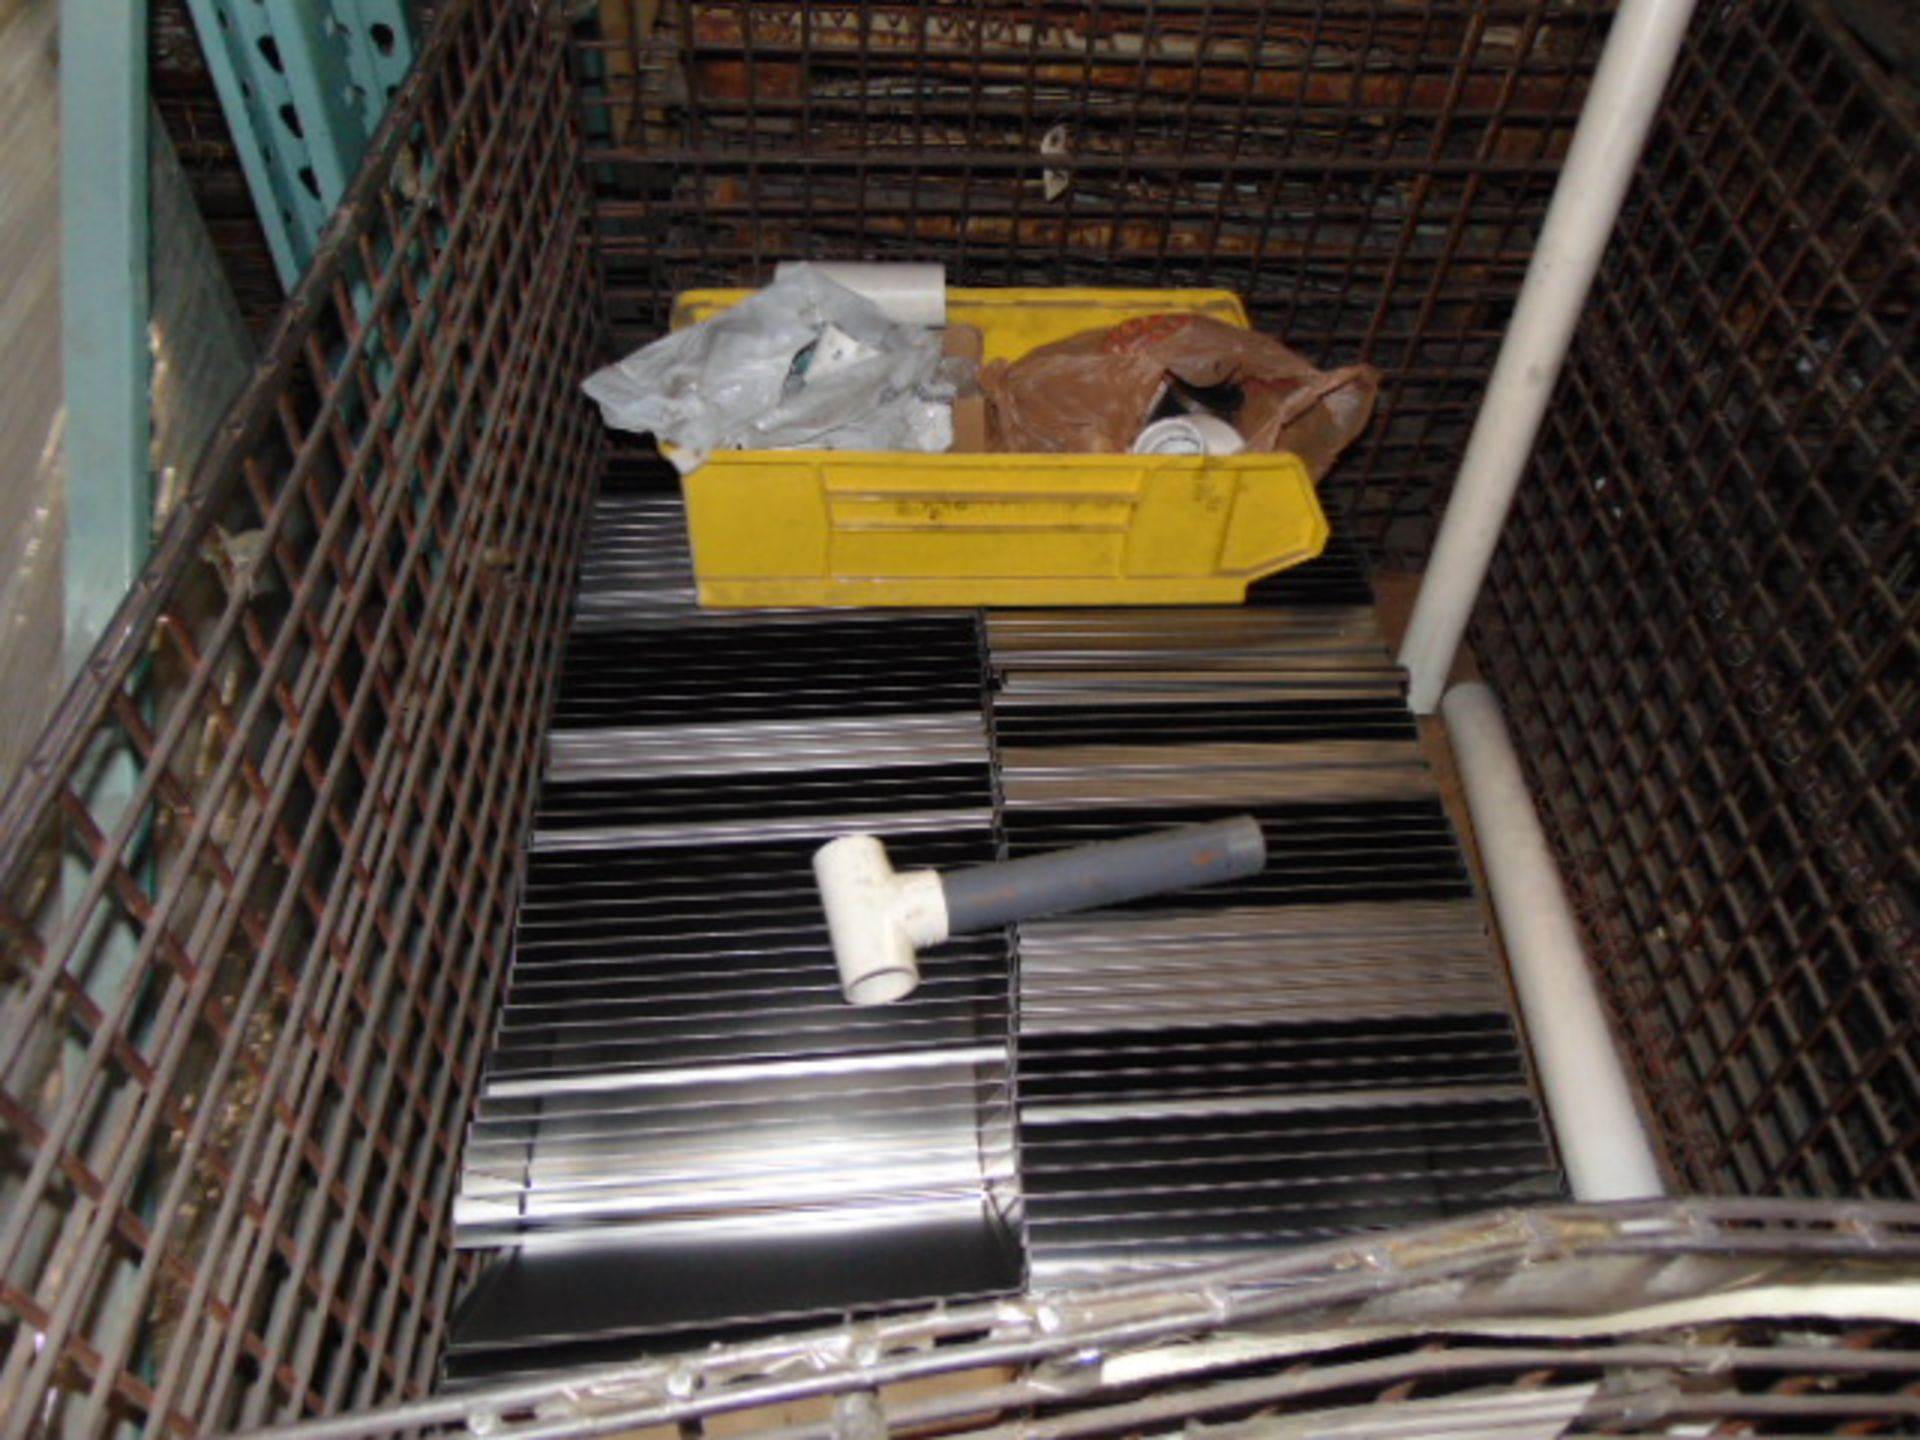 LOT CONSISTING OF: assorted steel in process parts, wire baskets & cardboard (no dies or racks) ( - Image 24 of 39